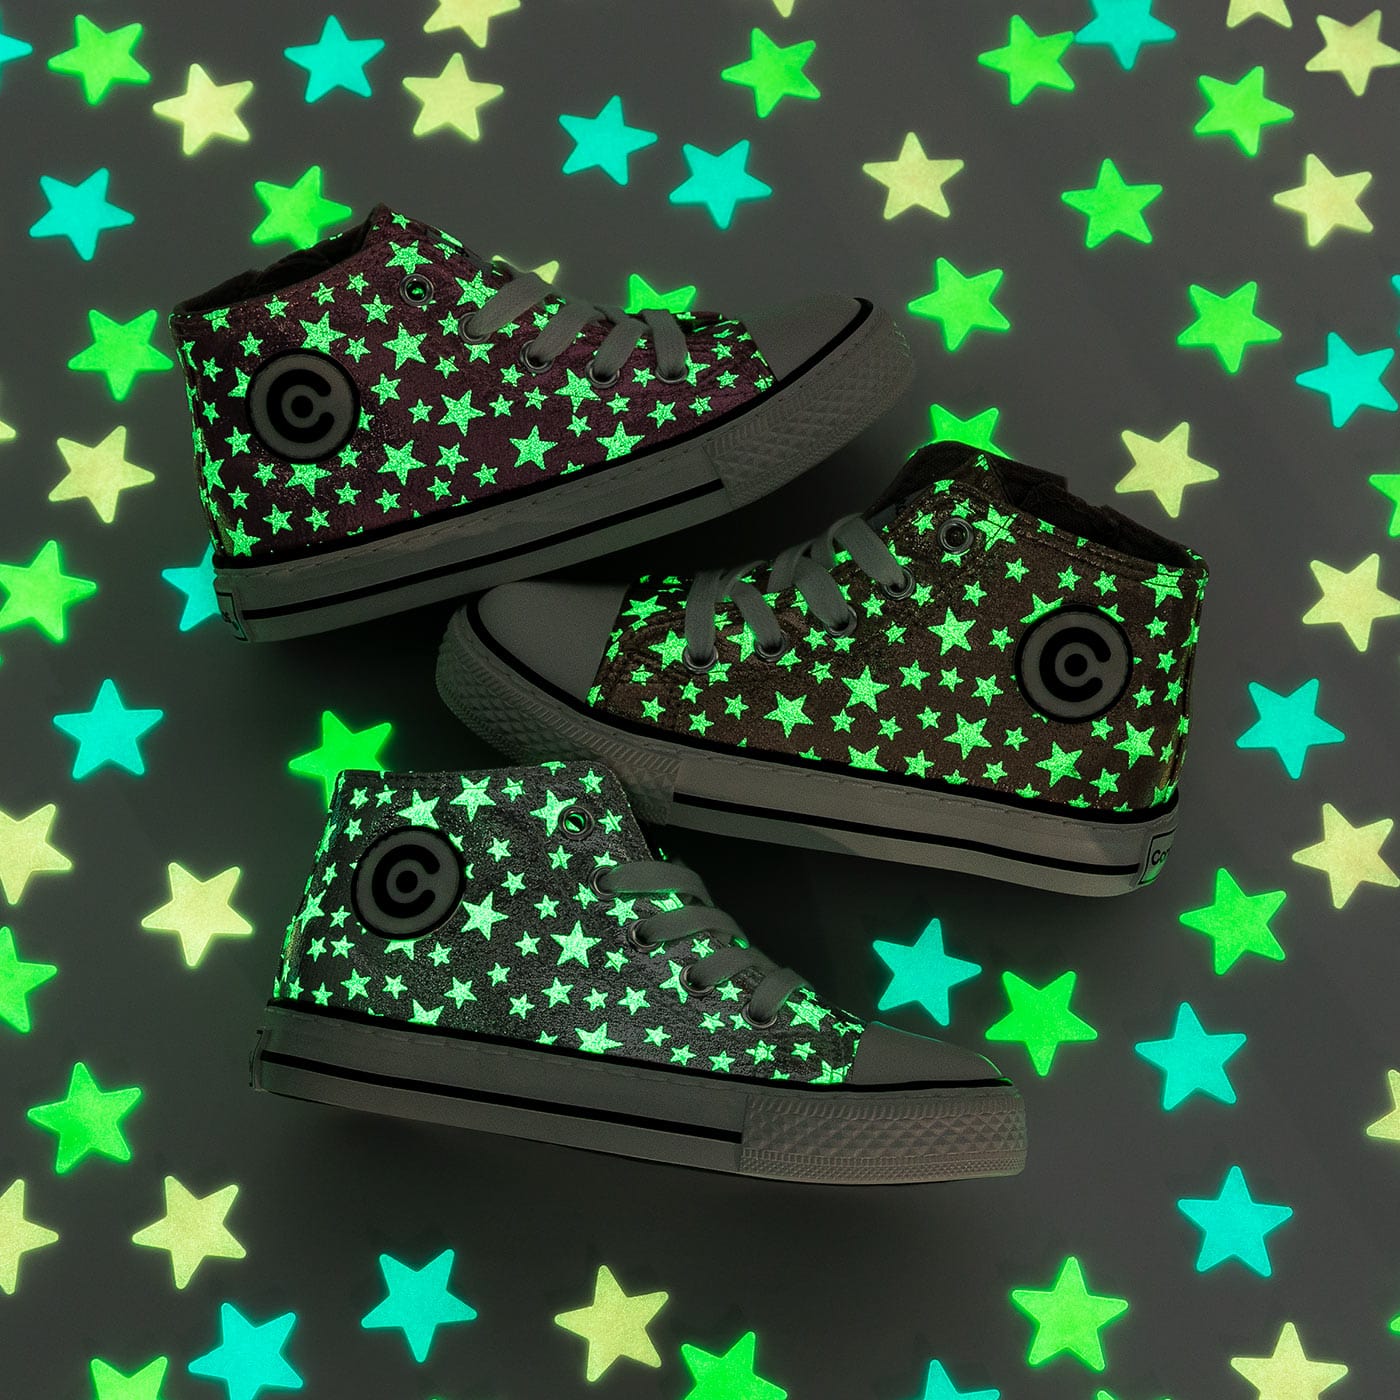 CONGUITOS Shoes Unisex Pink Glows in the Dark Hi-Top Sneakers